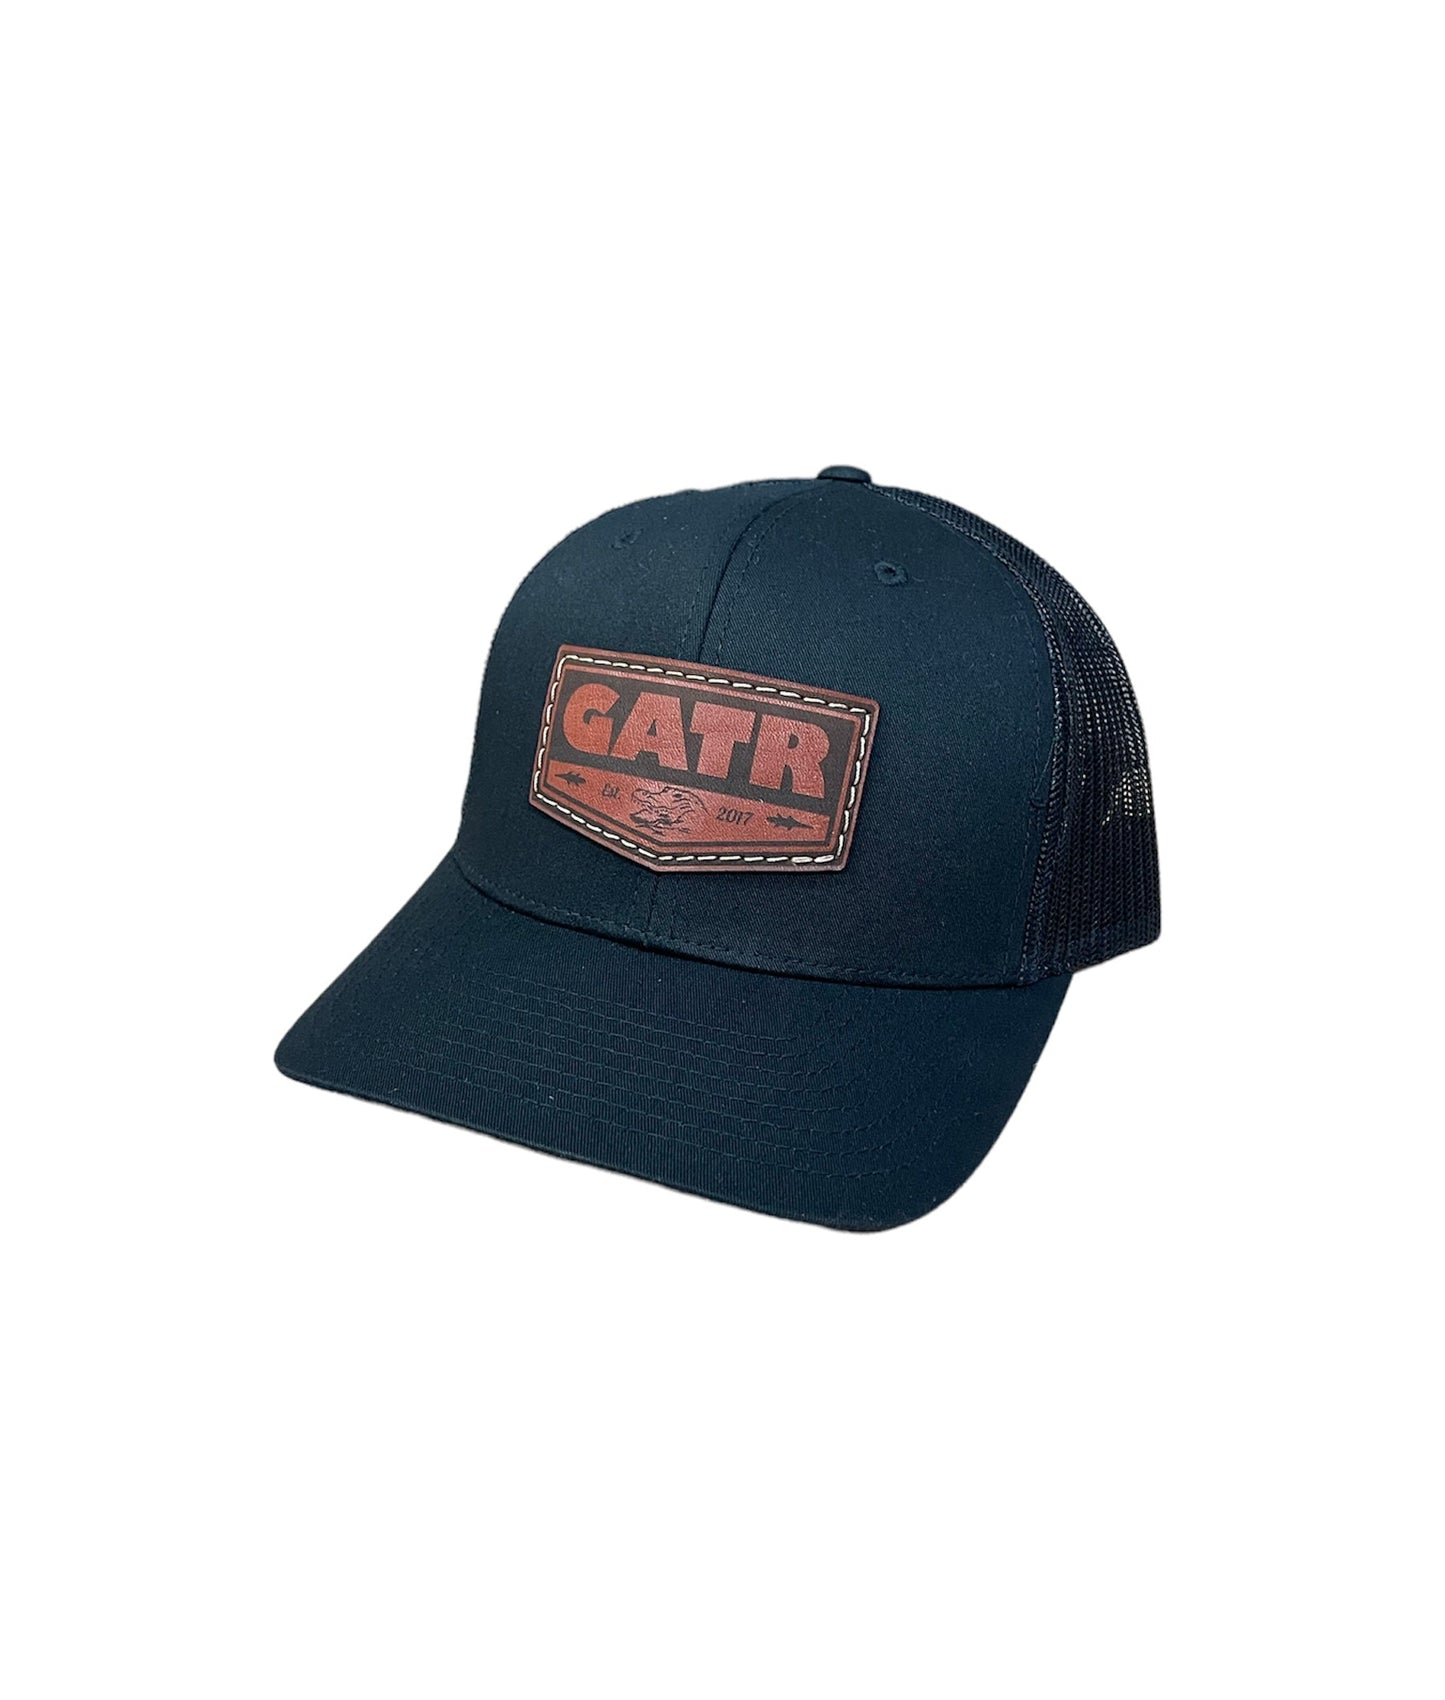 Premium Leather & Rubber Patch Hats by GATR